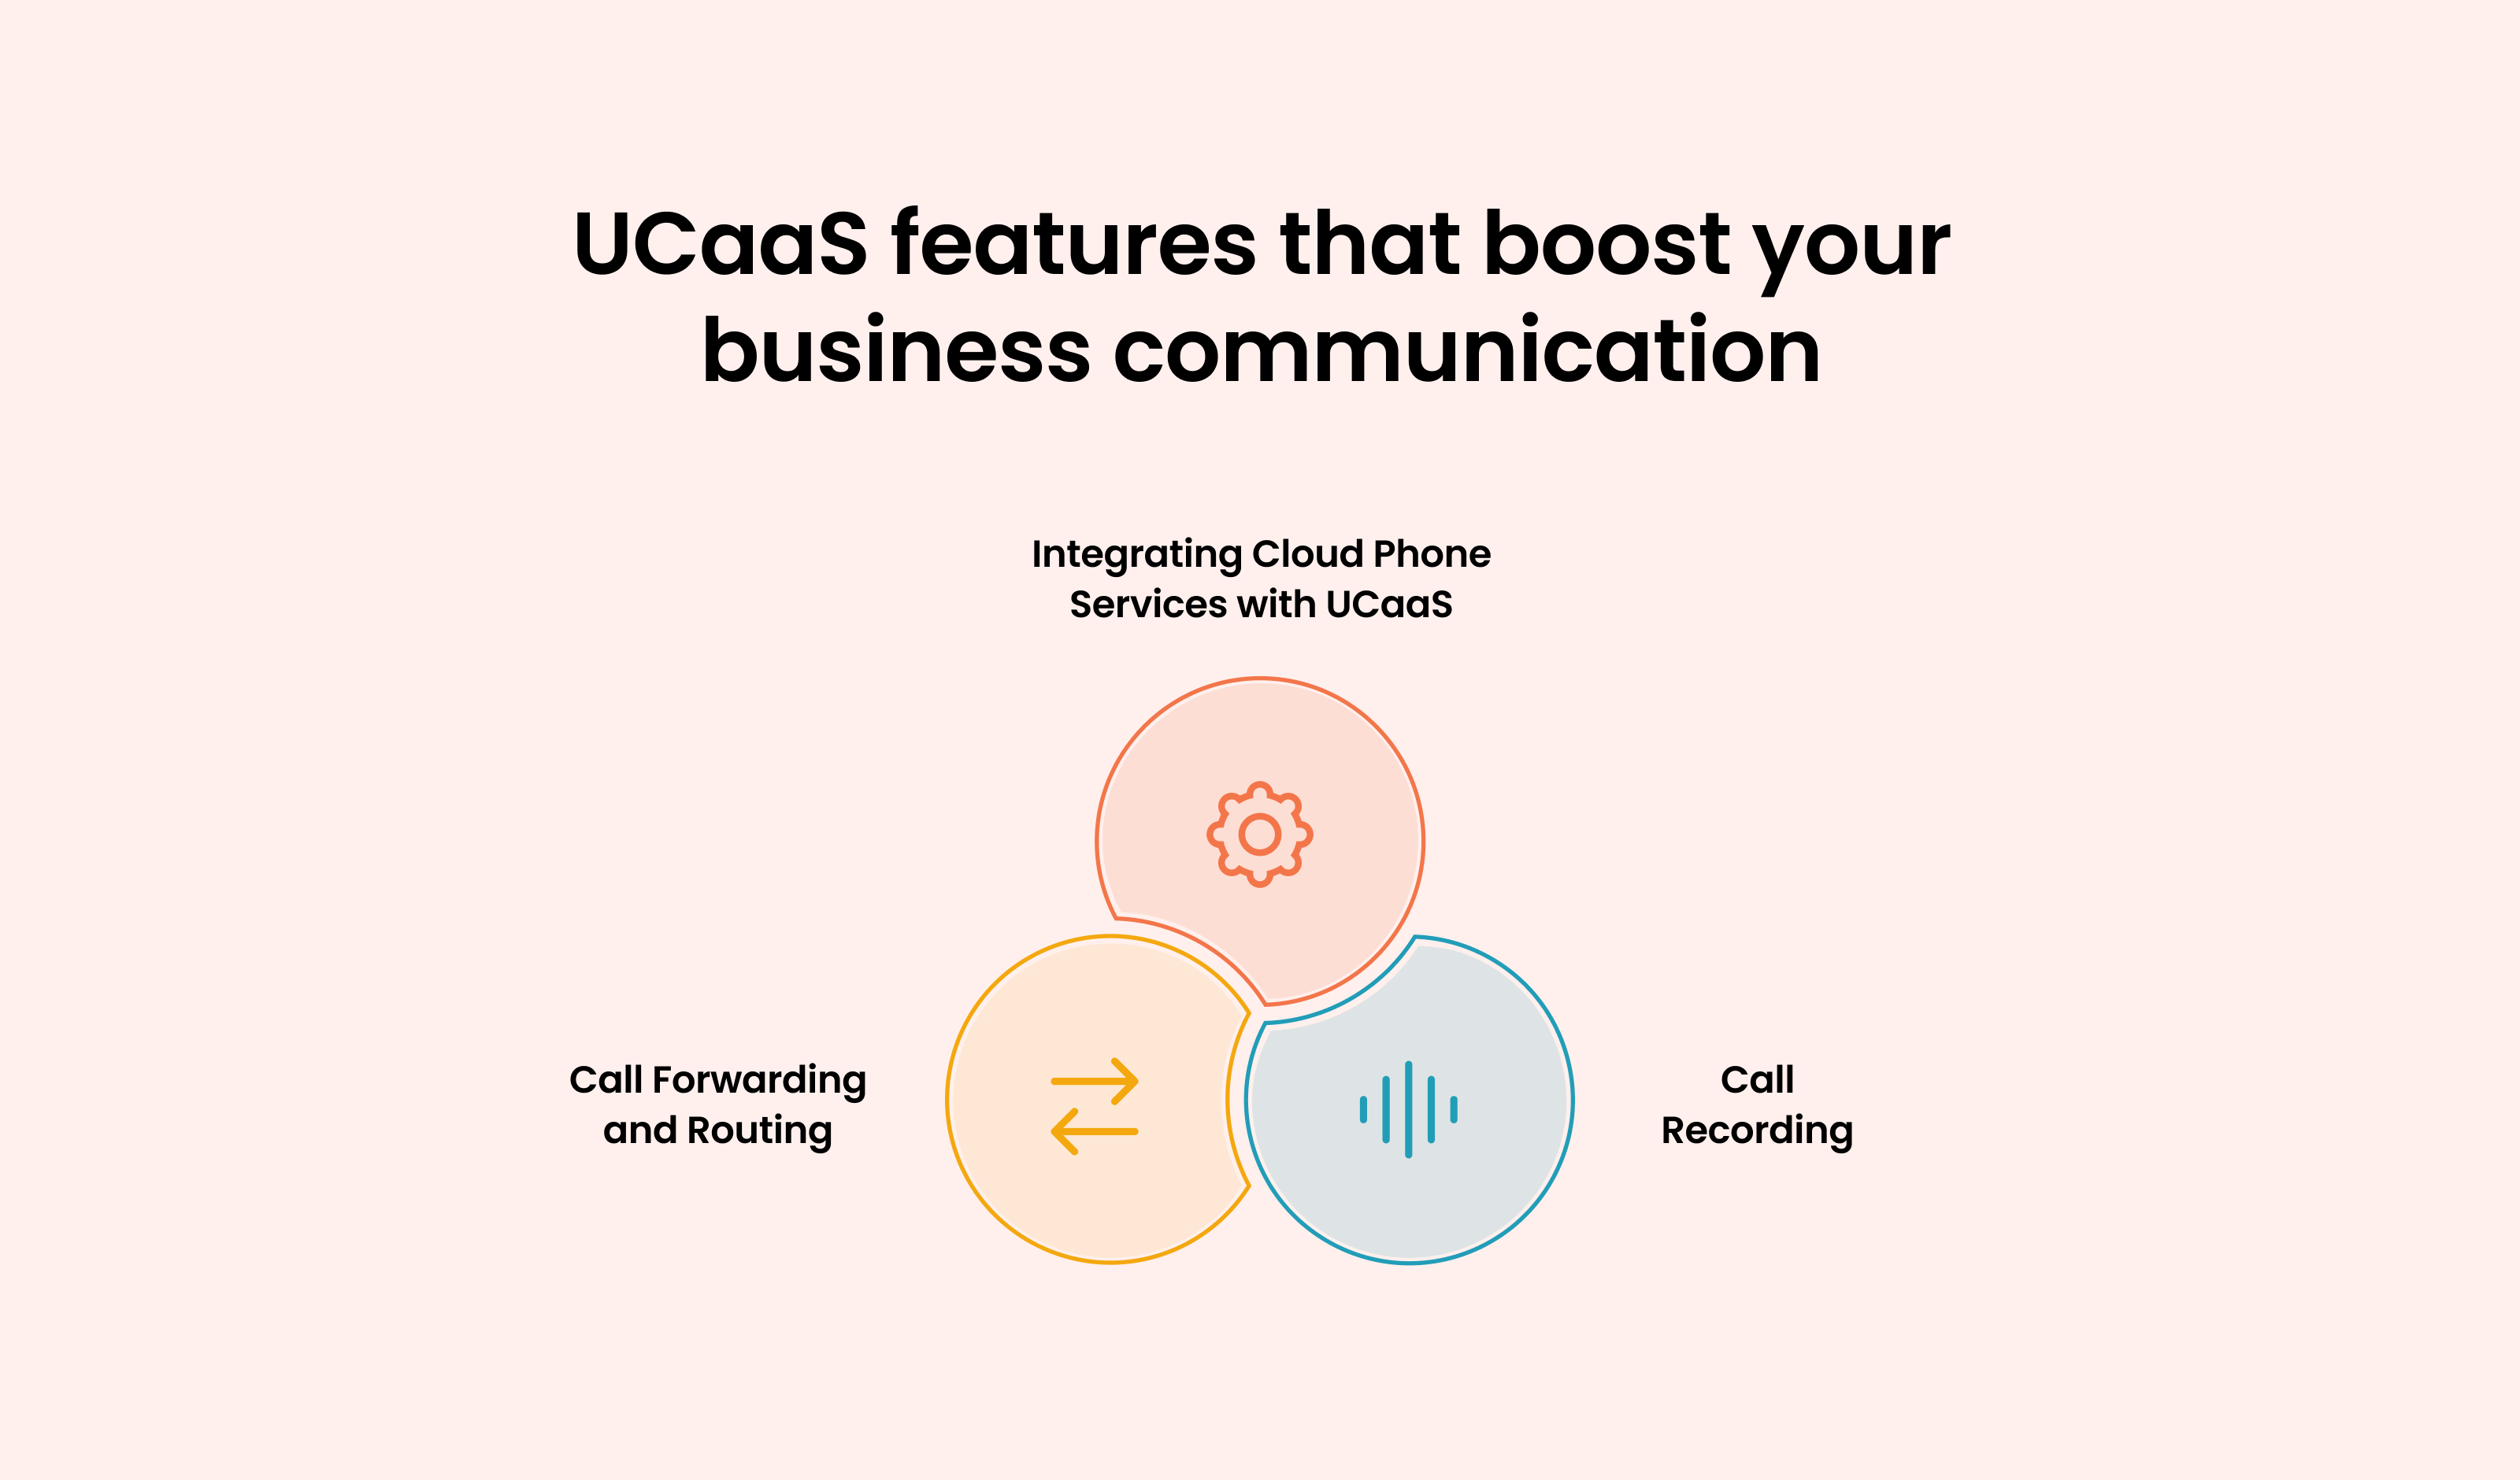  UCaaS Features that Boost Business Communication: